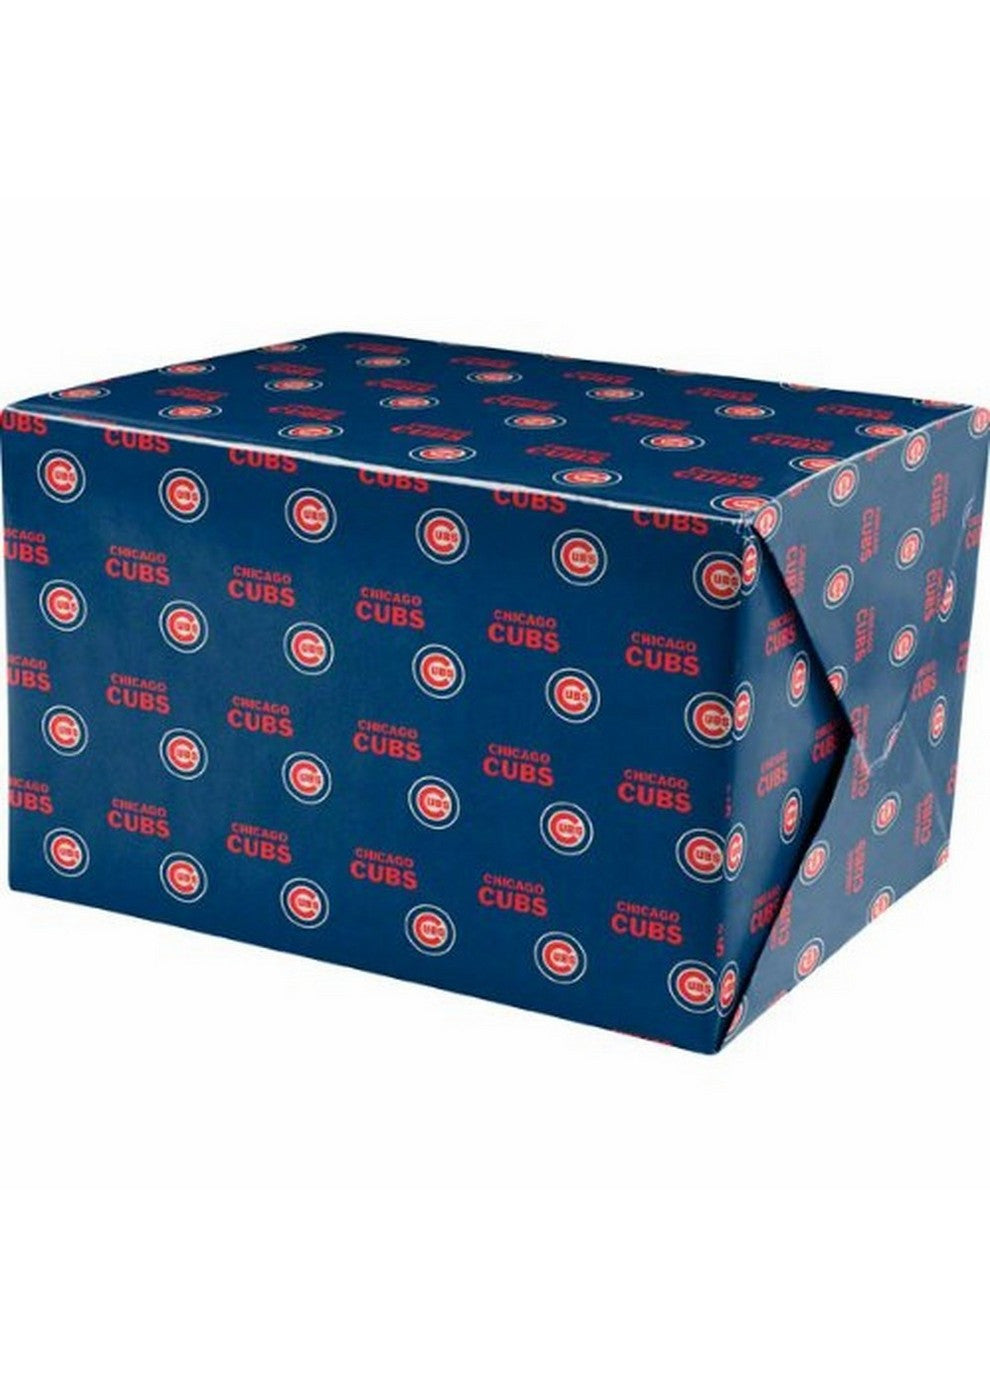 2 Packages of MLB Gift Wrap Cubs